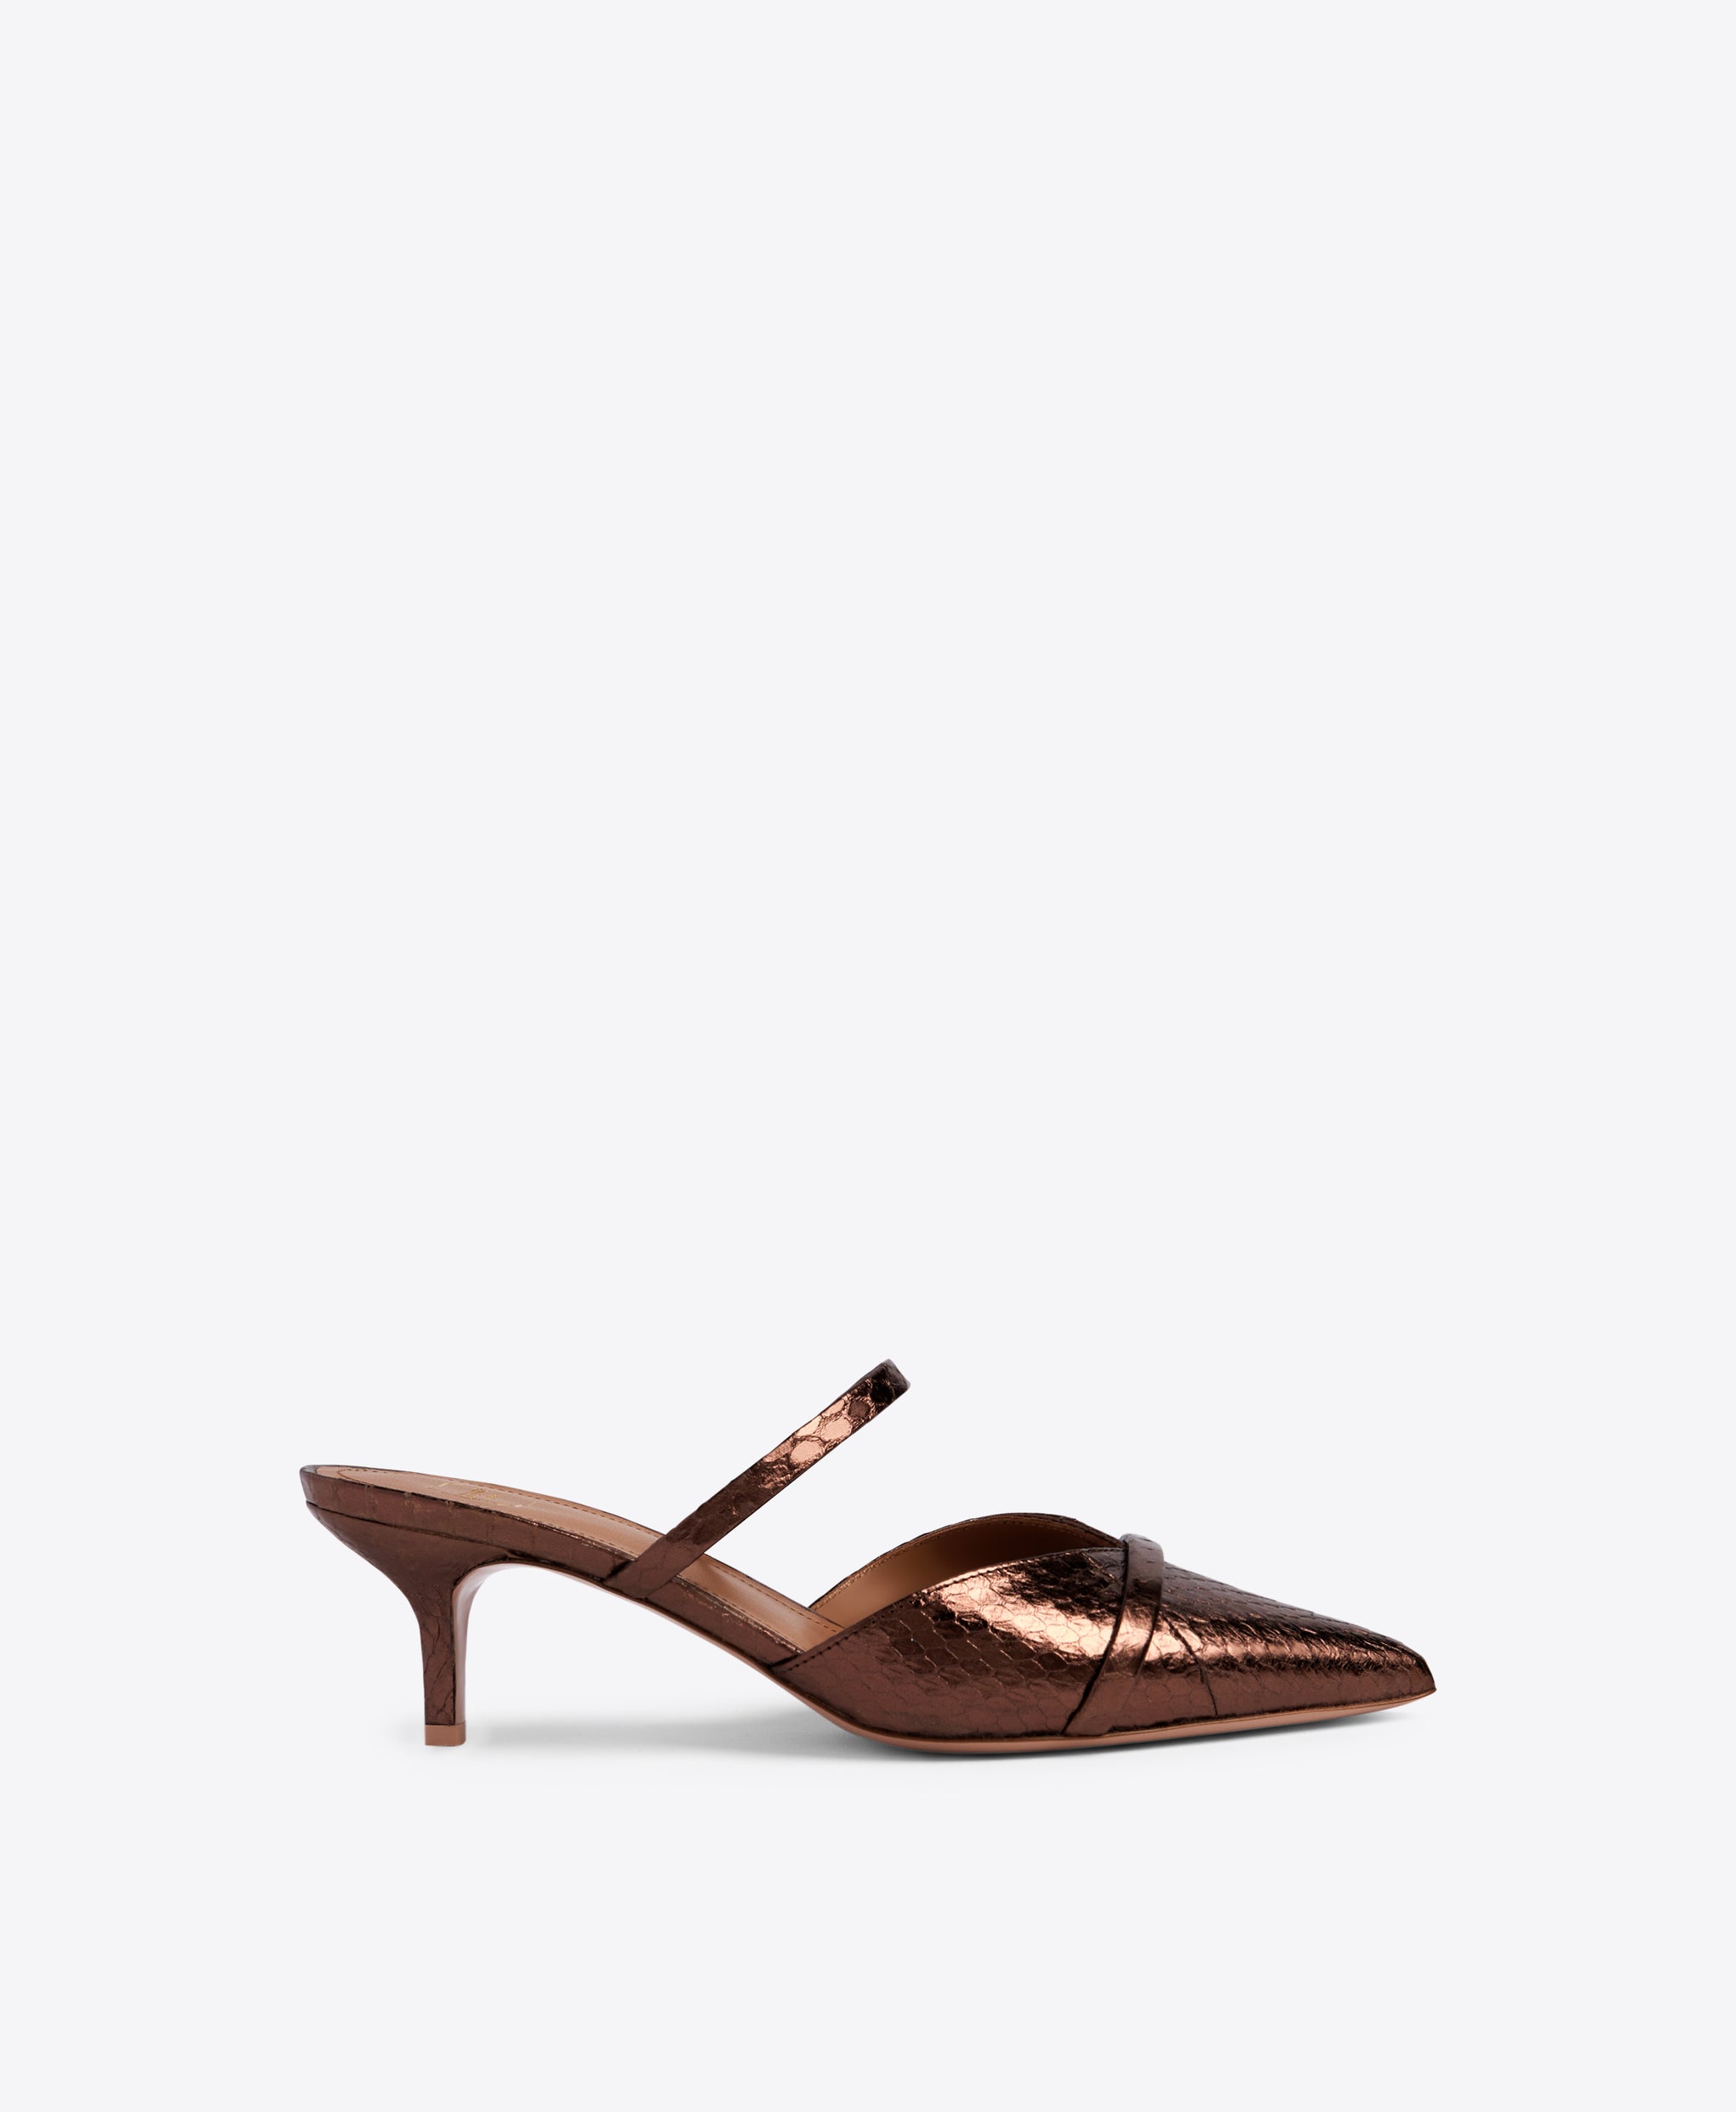 Double Strap Pointed Toe Stiletto Mules in Dark Brown Metallic | Malone Souliers